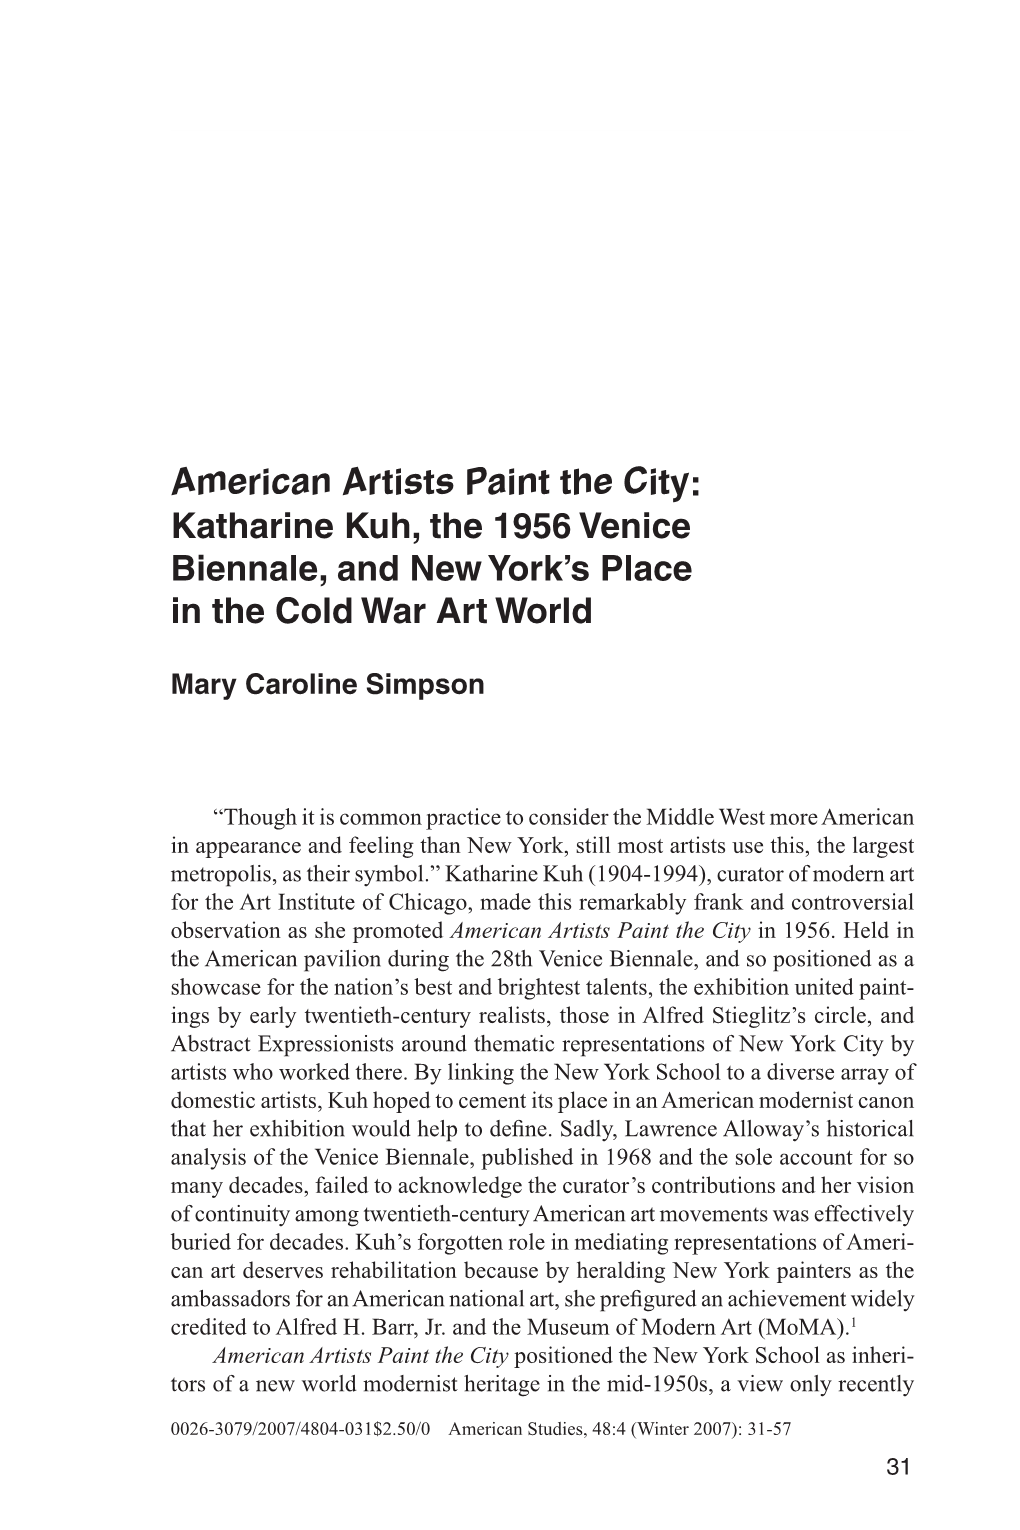 American Artists Paint the City: Katharine Kuh, the 1956 Venice Biennale, and New York’S Place in the Cold War Art World